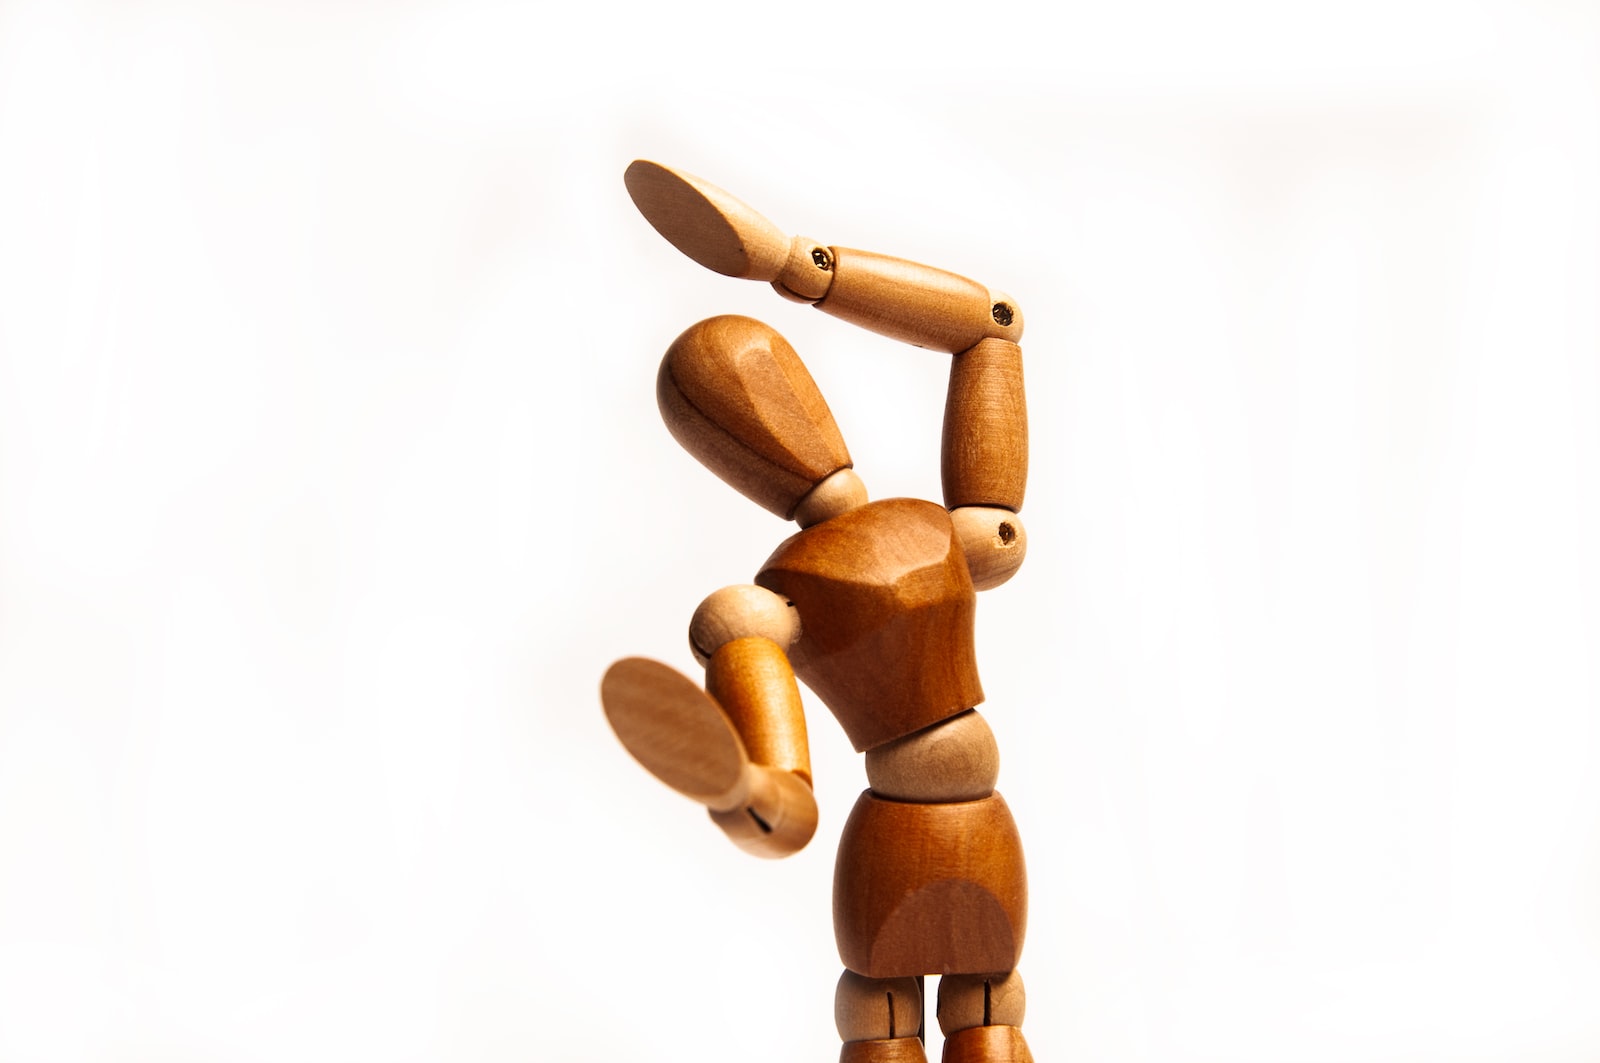 A wooden figurine man with his hands in the air.